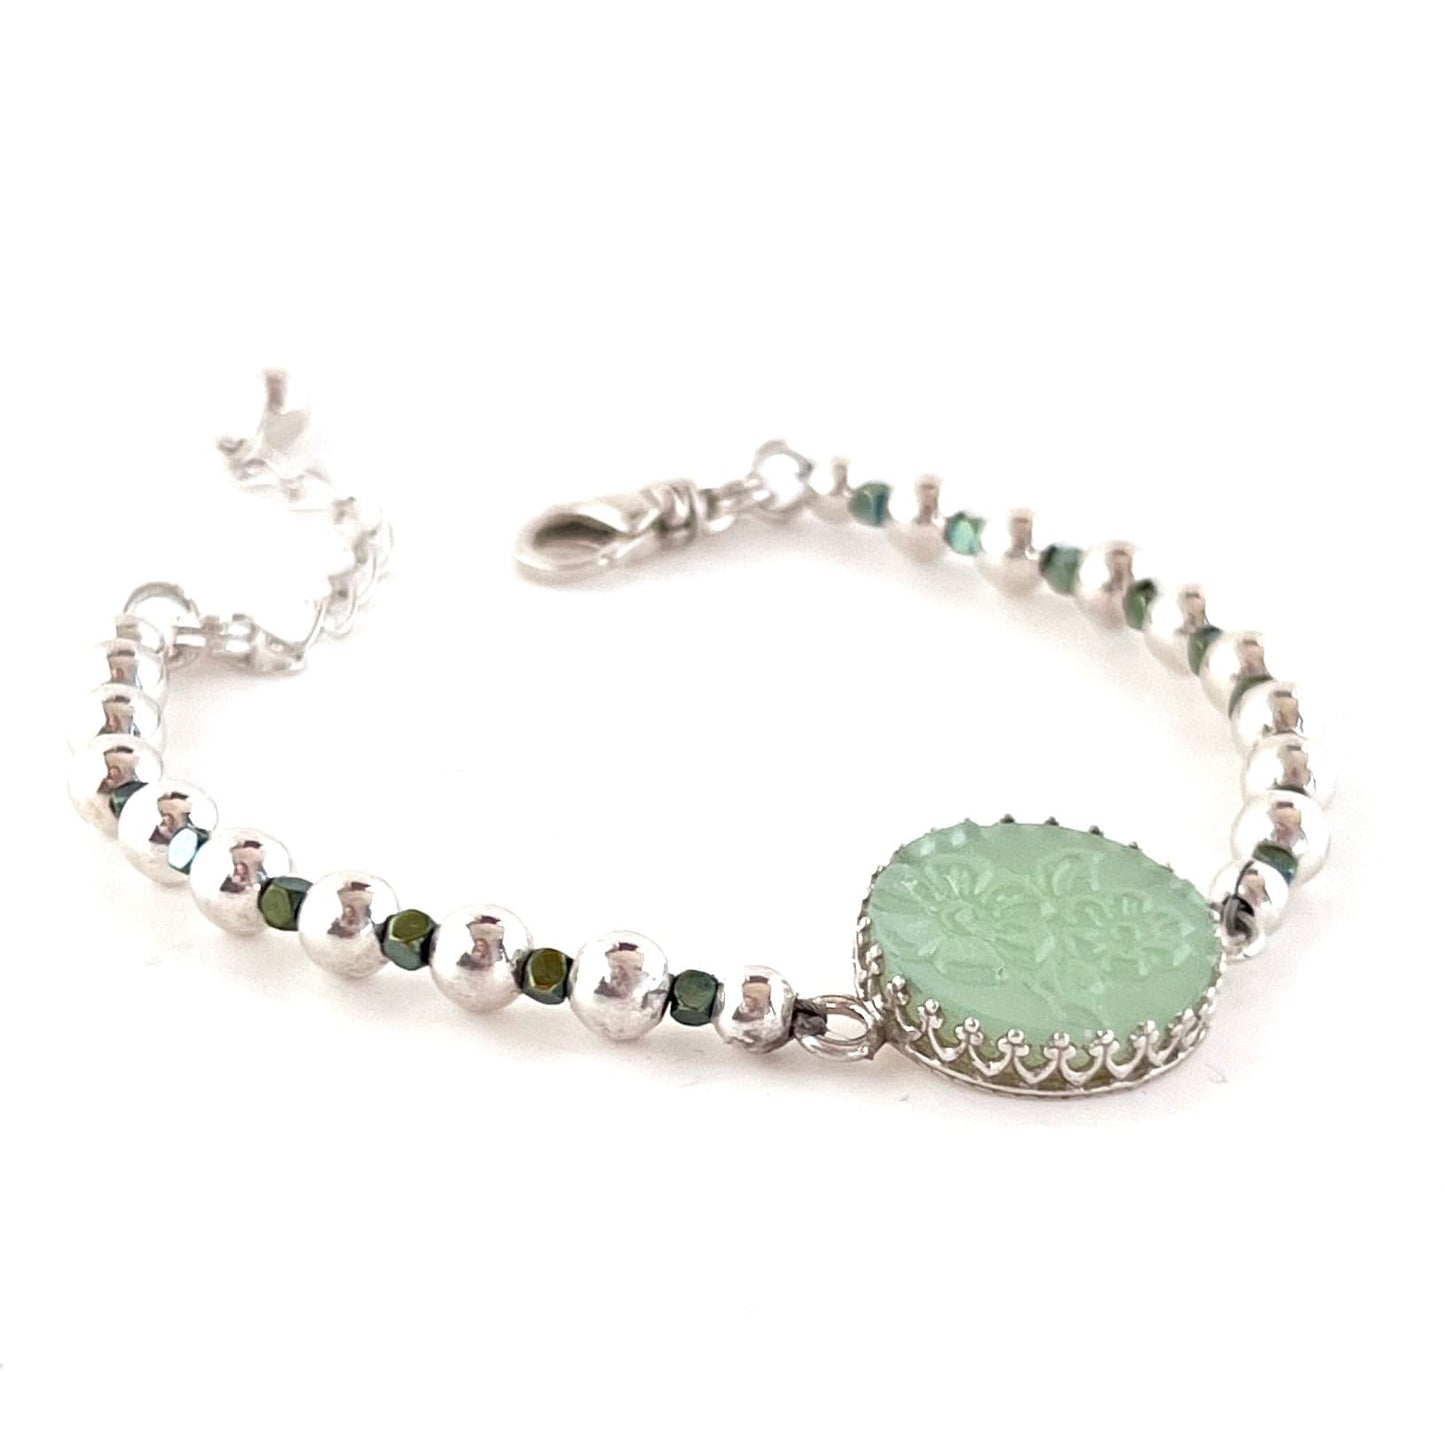 Fire King Alice Jadeite Jewelry Bracelet, Silver Beaded Bracelet, Unique Gifts for Women, Vintage Depression Glass and Pyrite